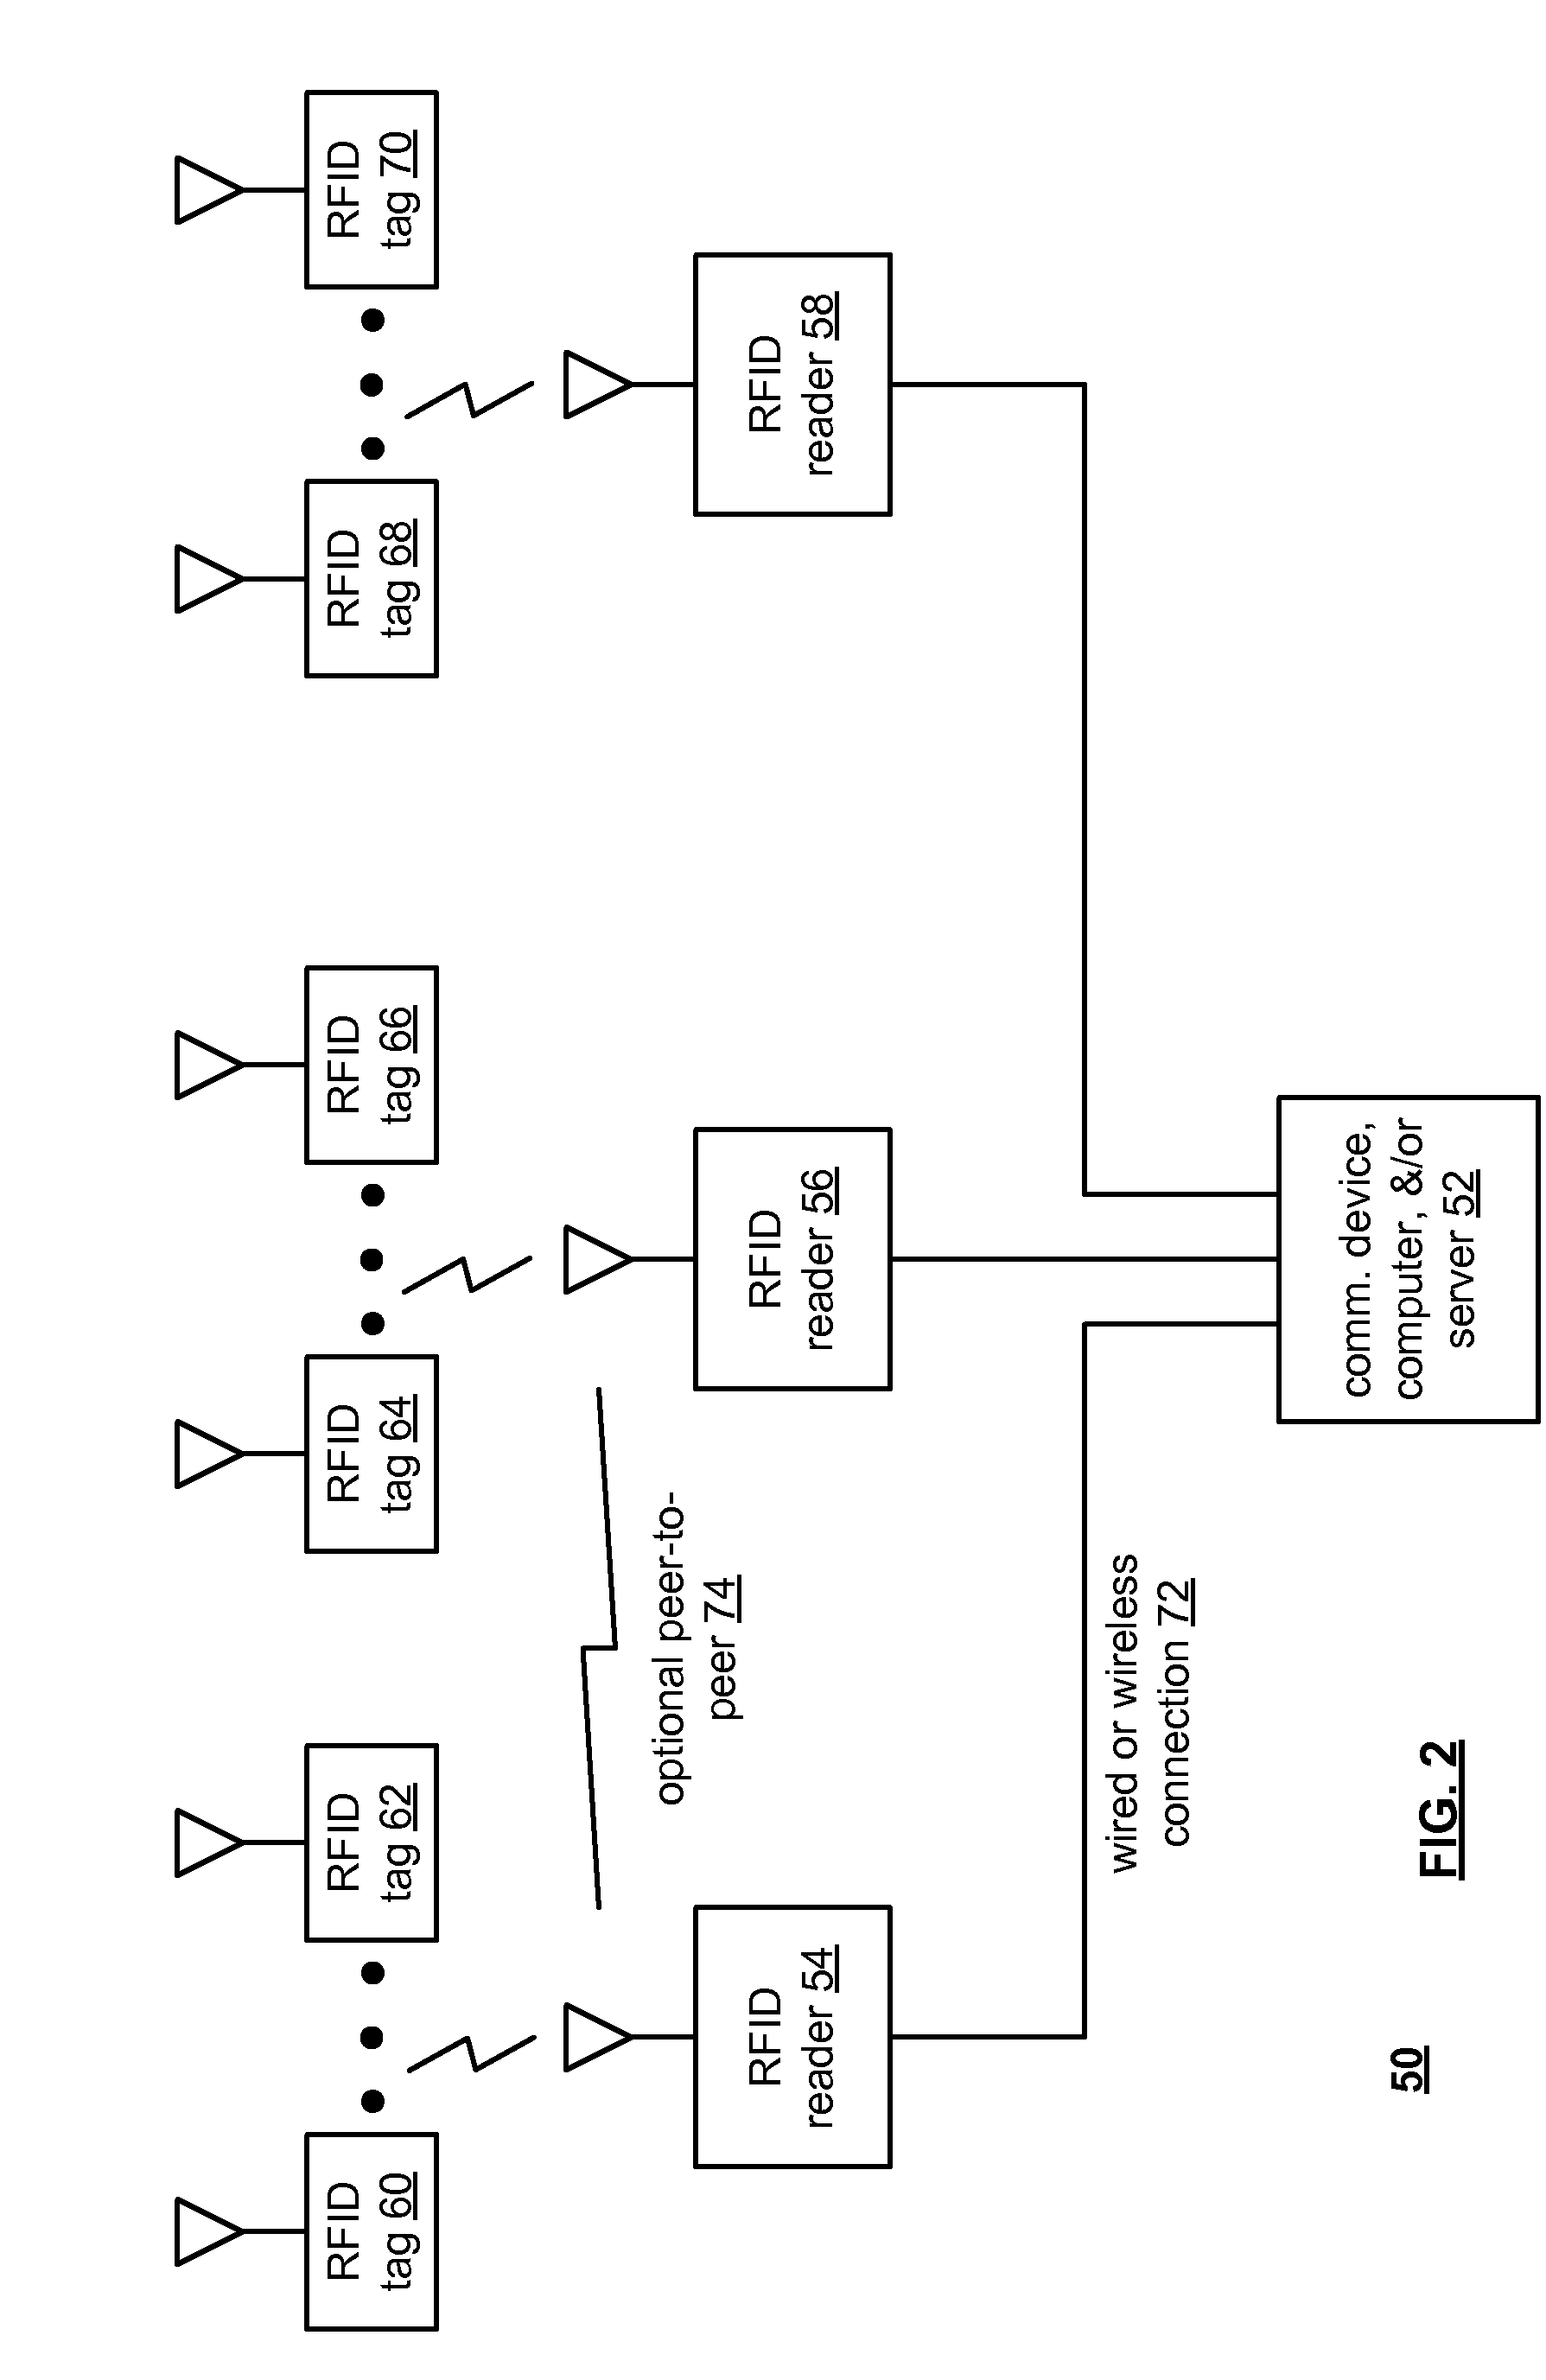 Integrated circuit with intra-chip and extra-chip RF communication